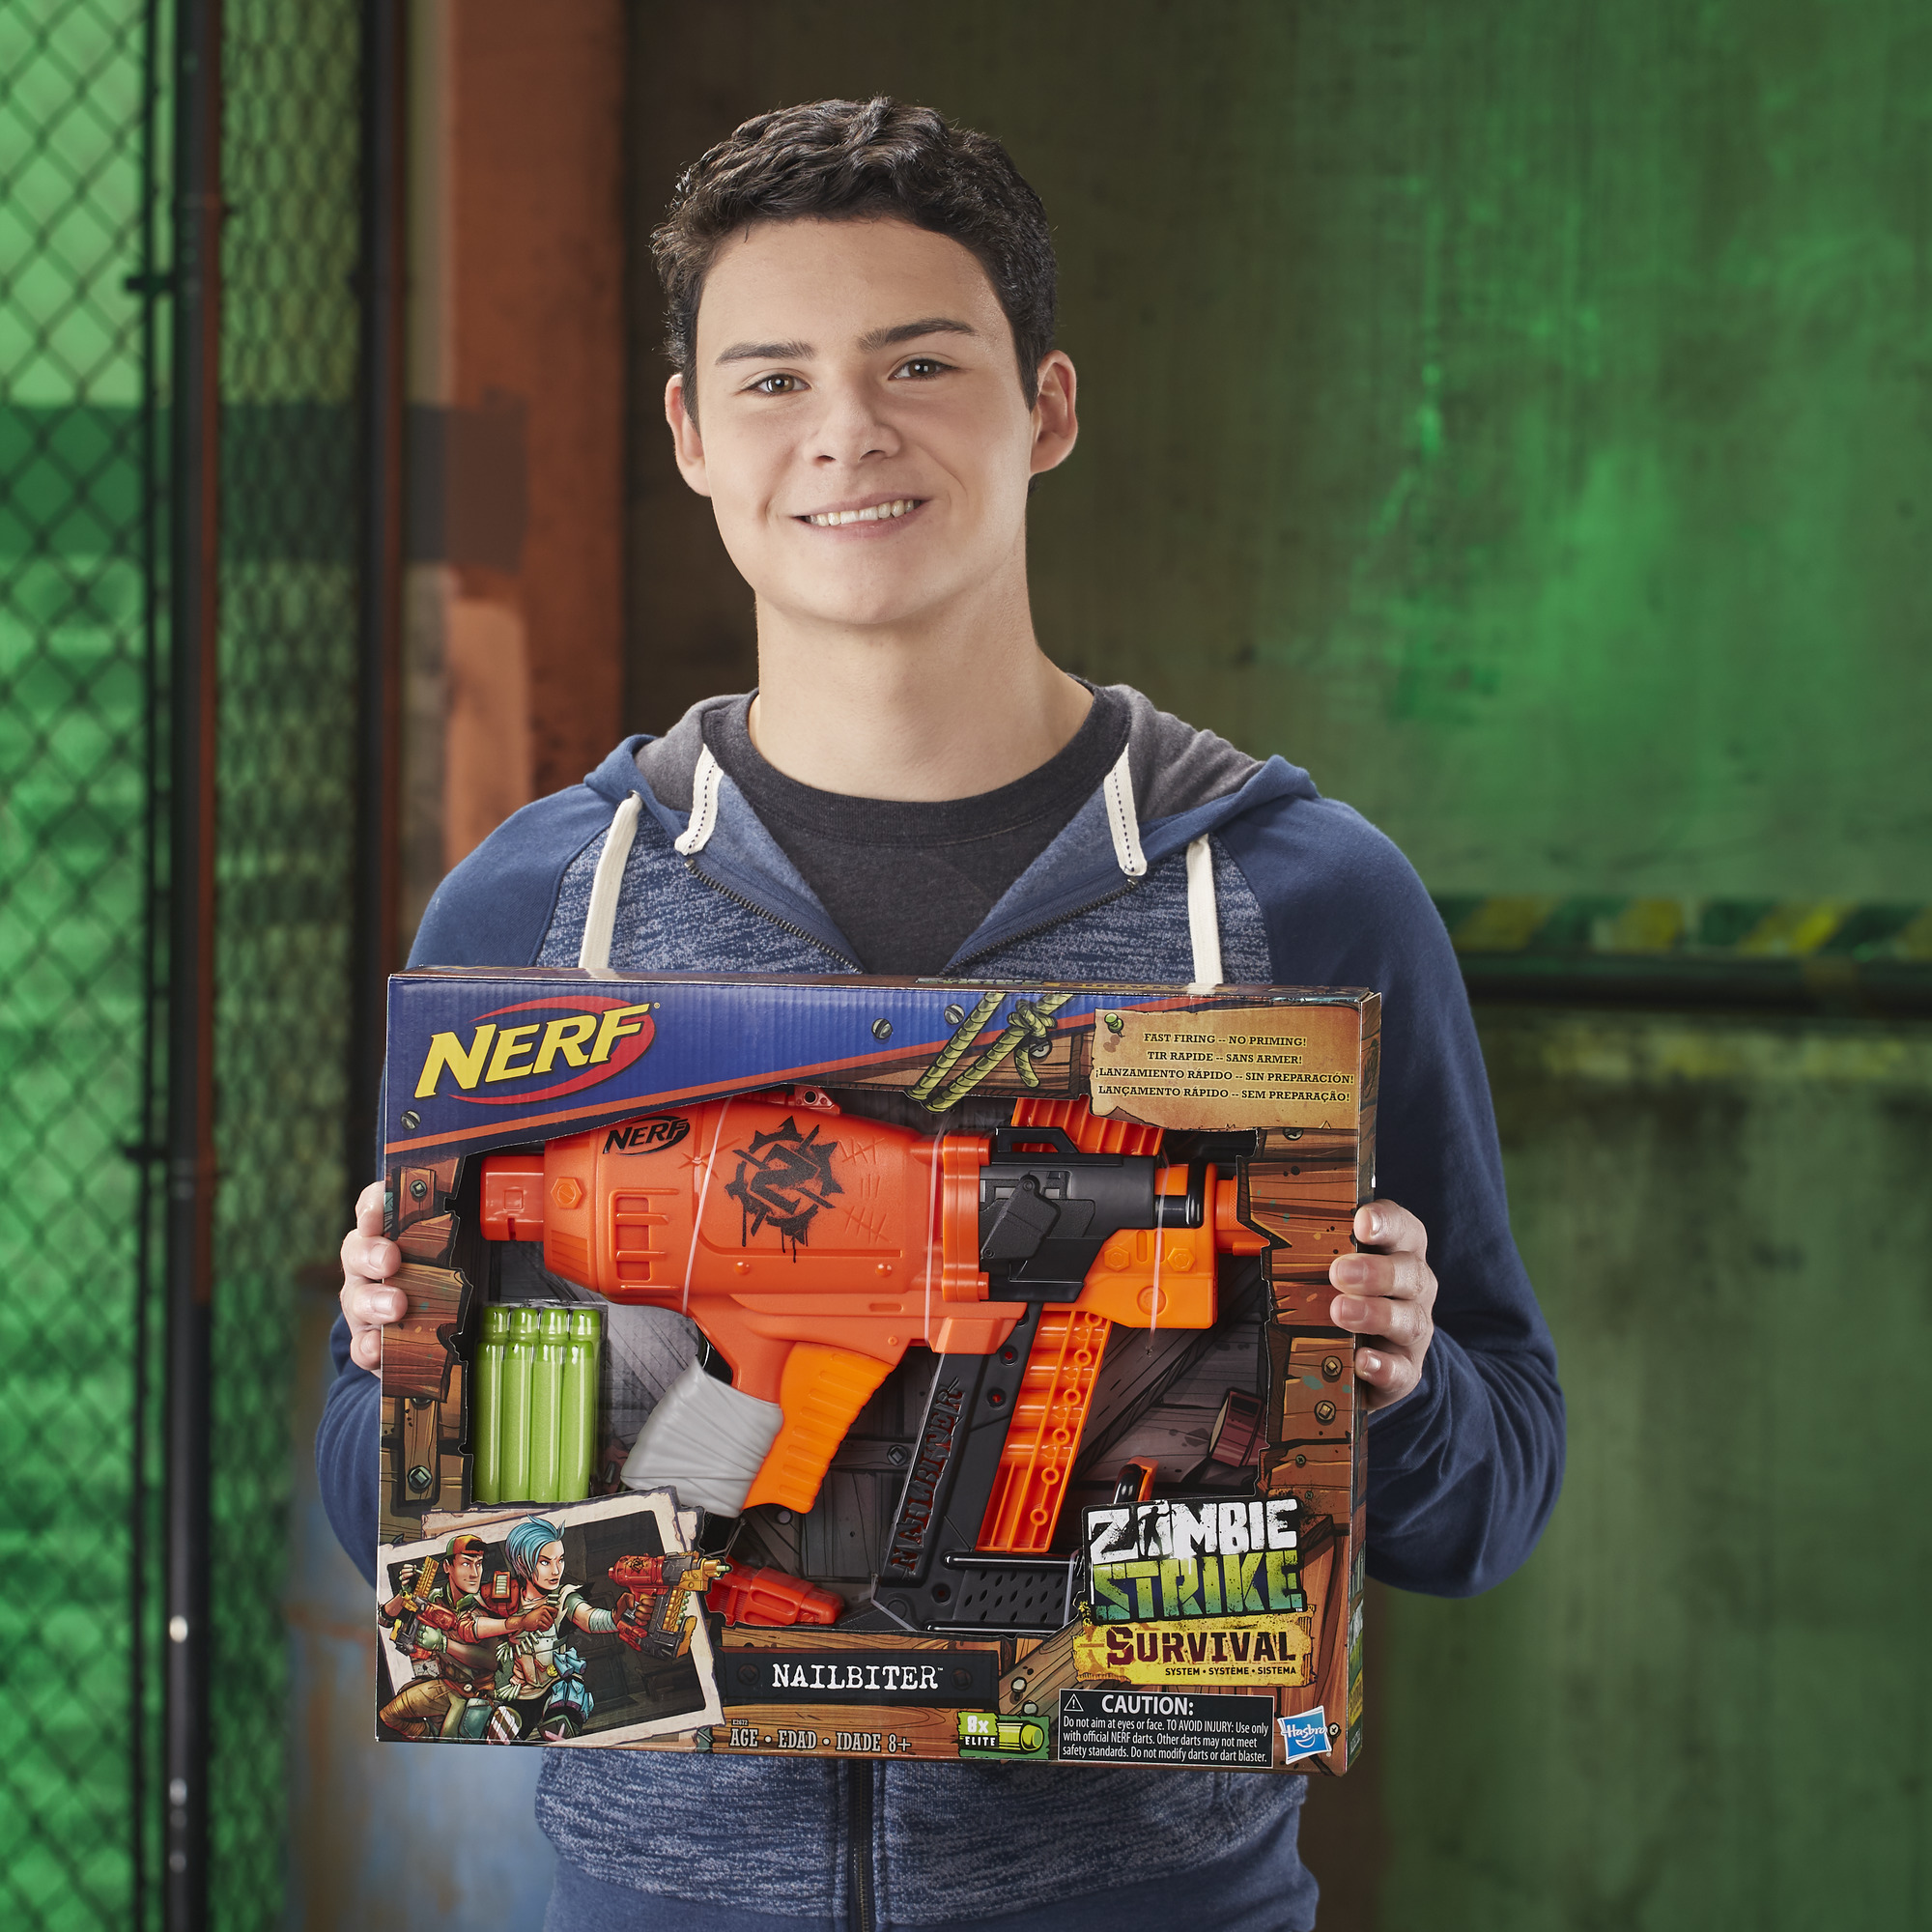 Nerf Zombie Survival Nailbiter Kids Toy Blaster with 8 Darts - image 4 of 9